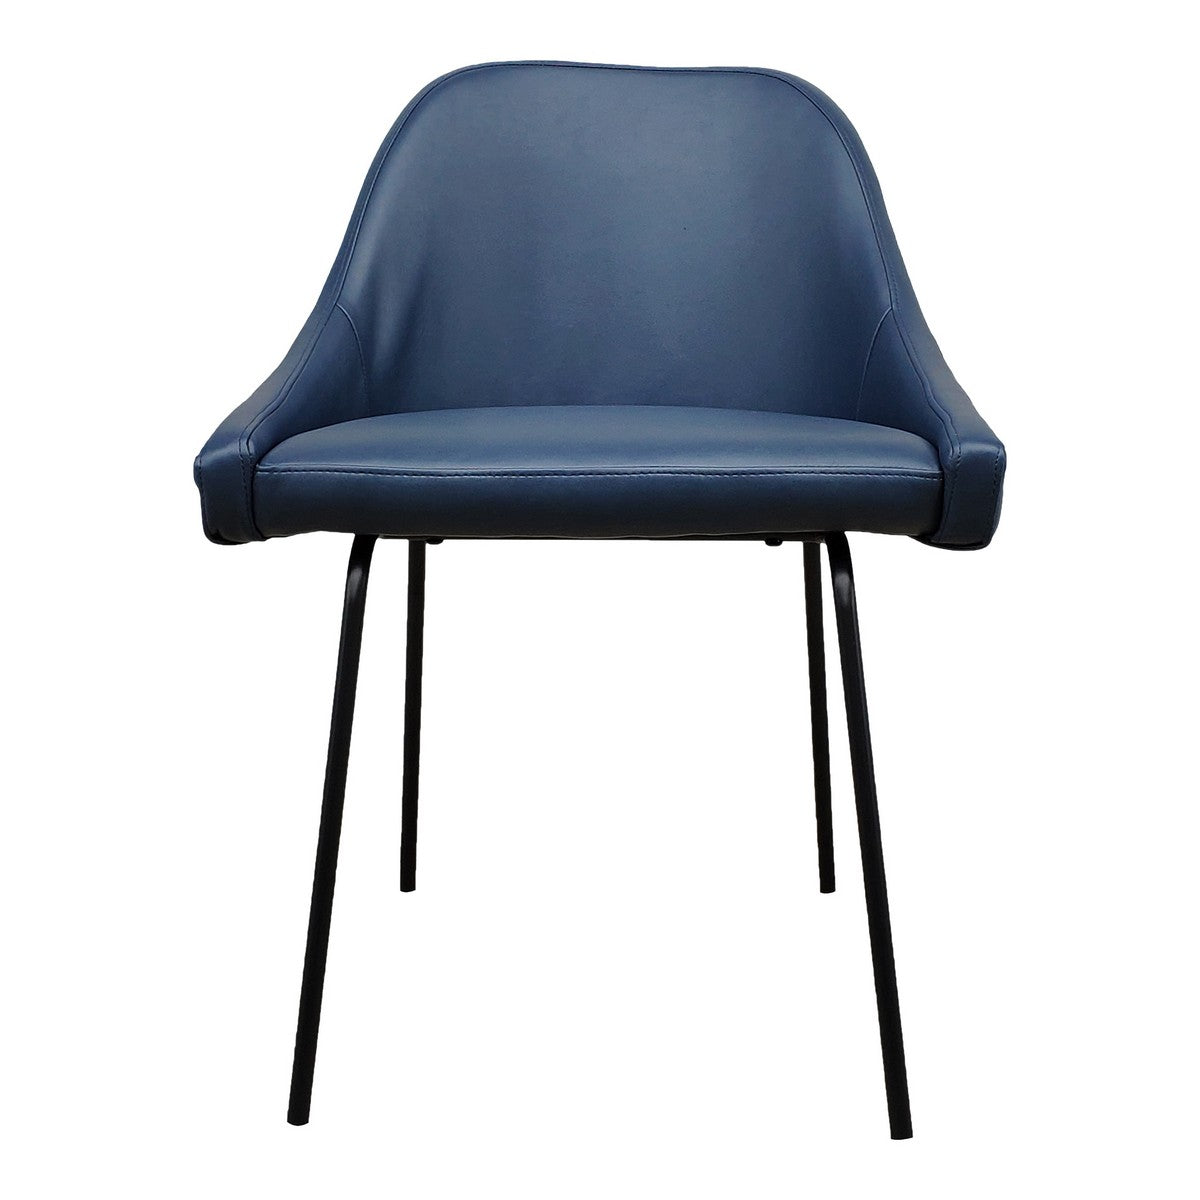 Moe's Home Collection Blaze Dining Chair Blue - FN-1035-26 - Moe's Home Collection - Dining Chairs - Minimal And Modern - 1